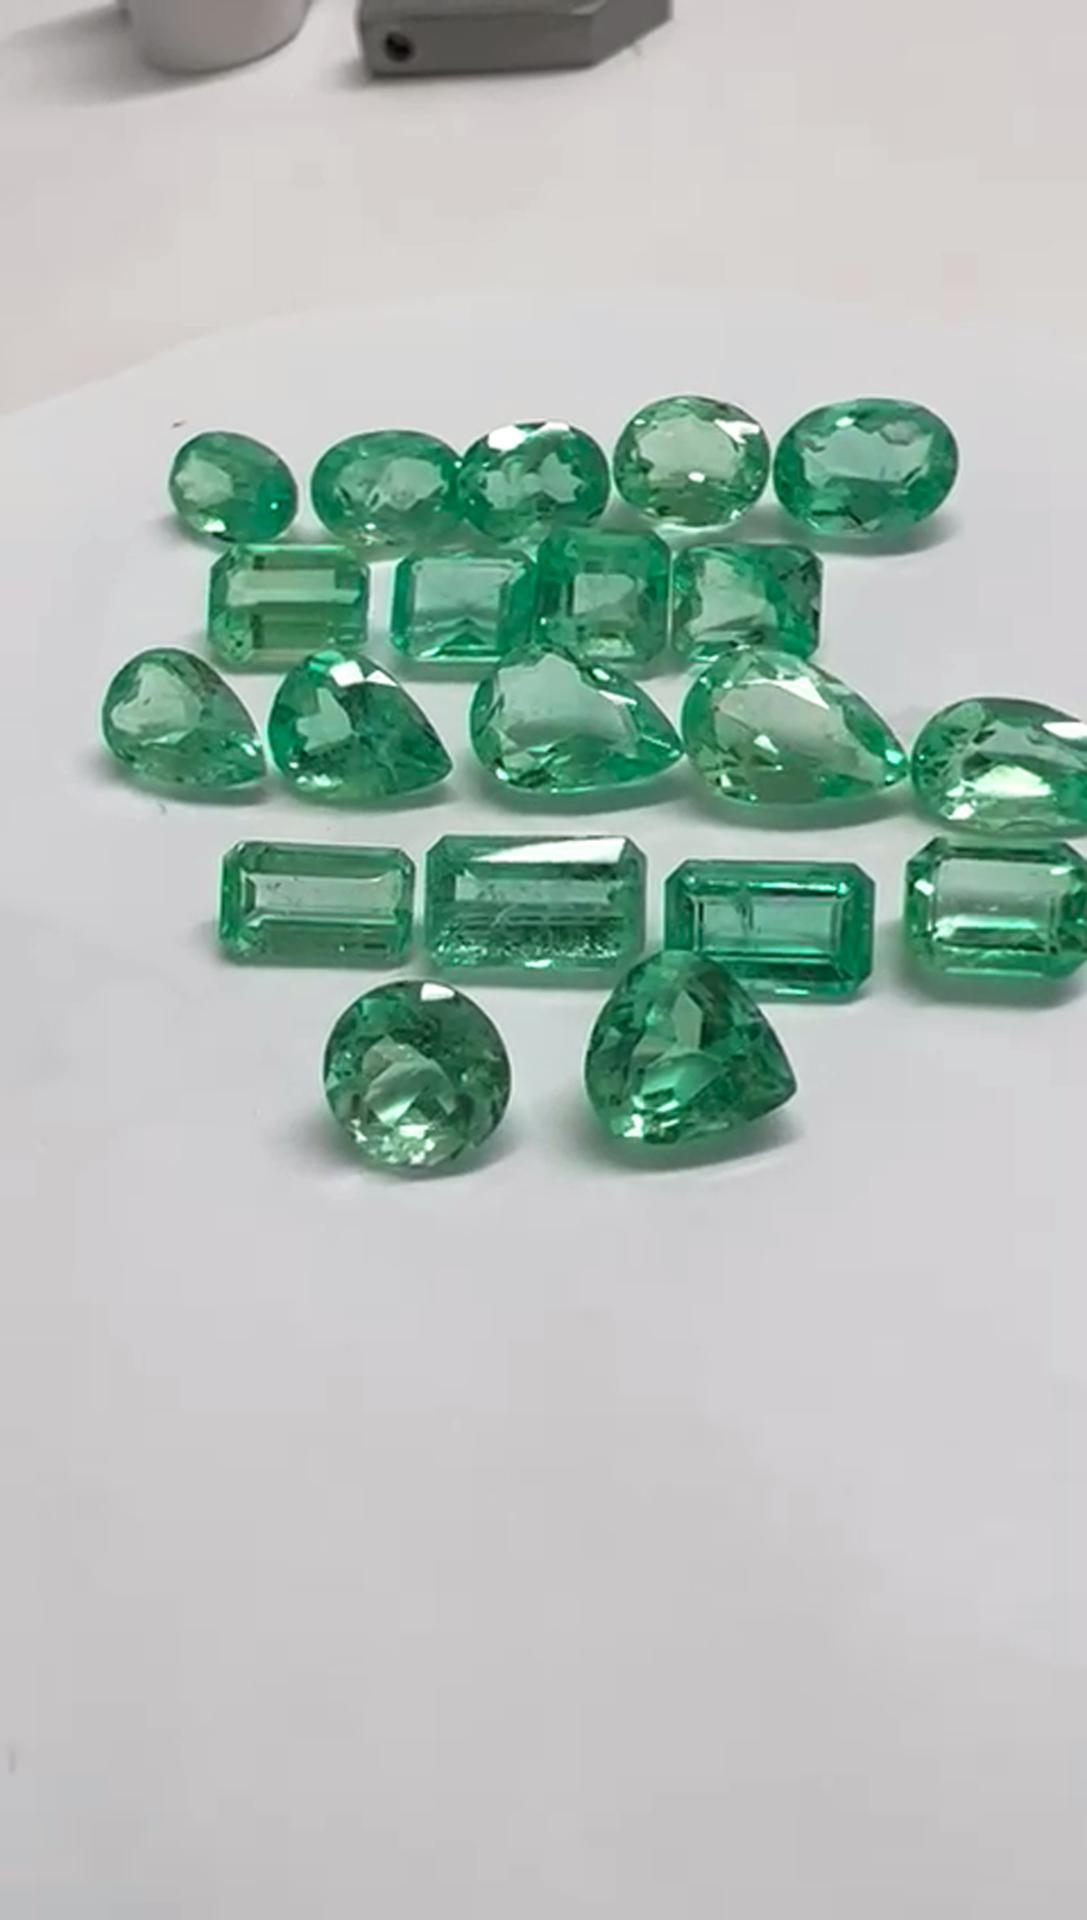 25 Ct. Colombian Emerald Lot 